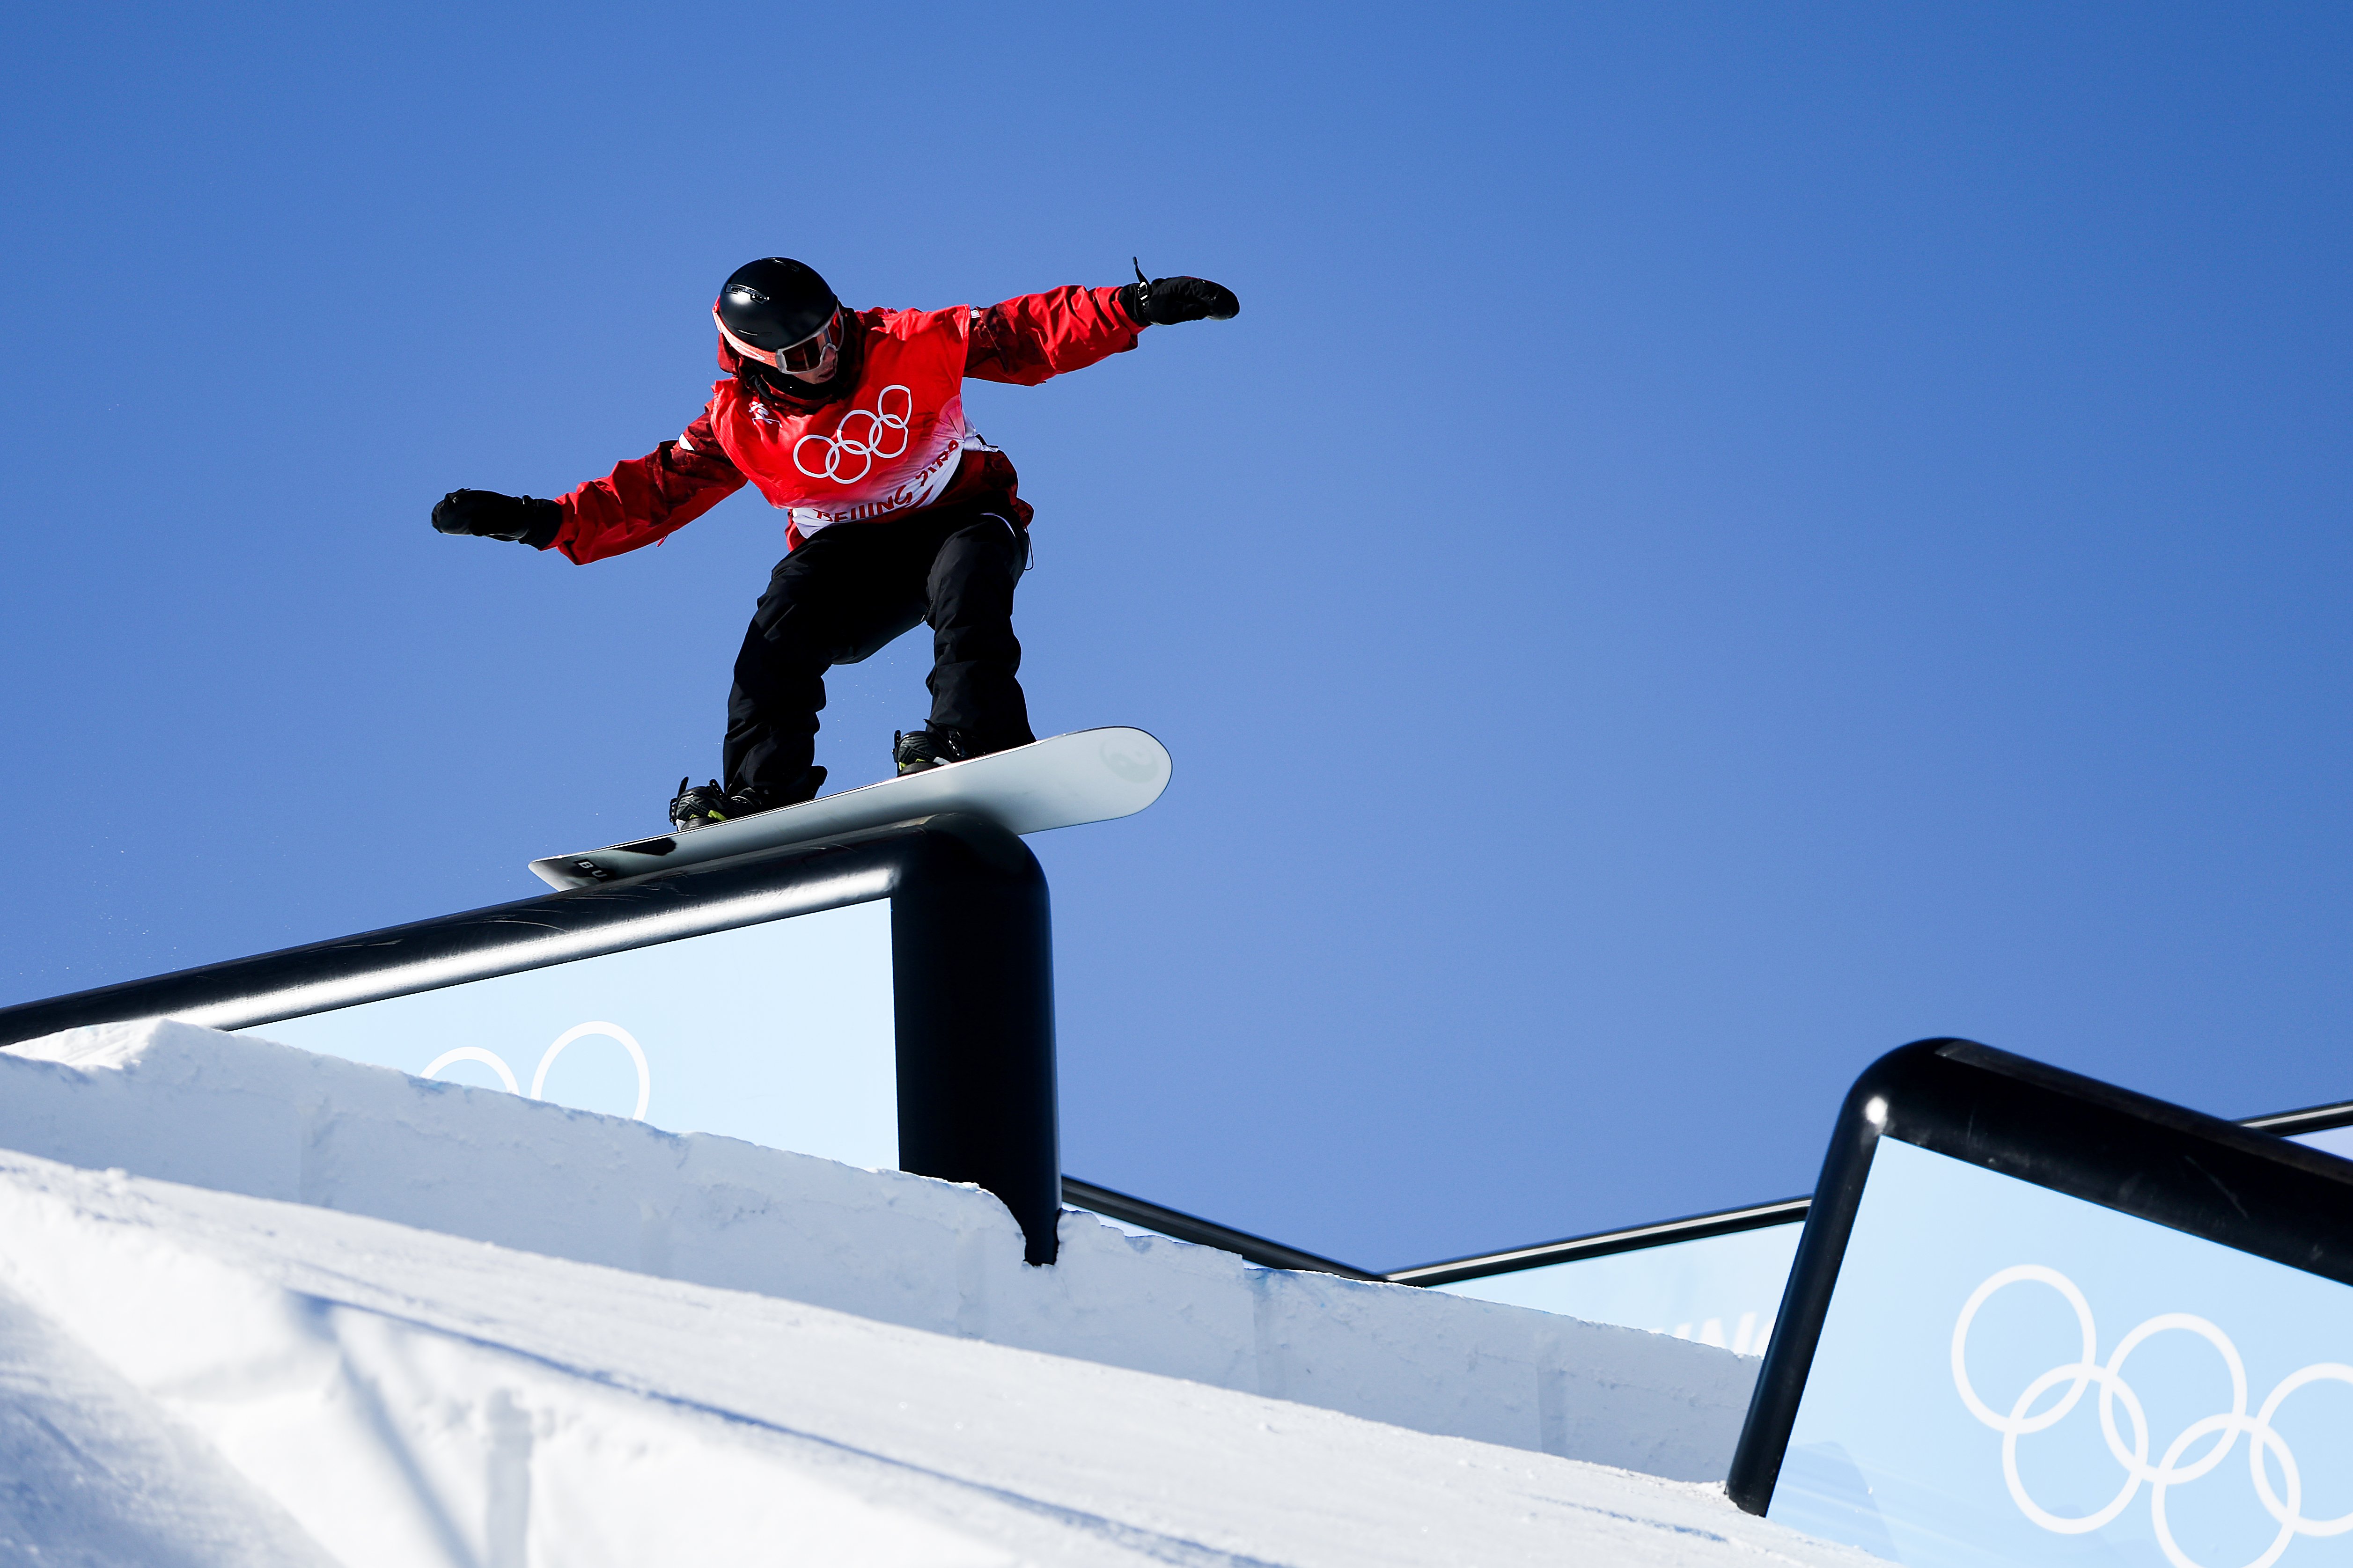 In photos Three Canadians advance to men’s slopestyle final and other